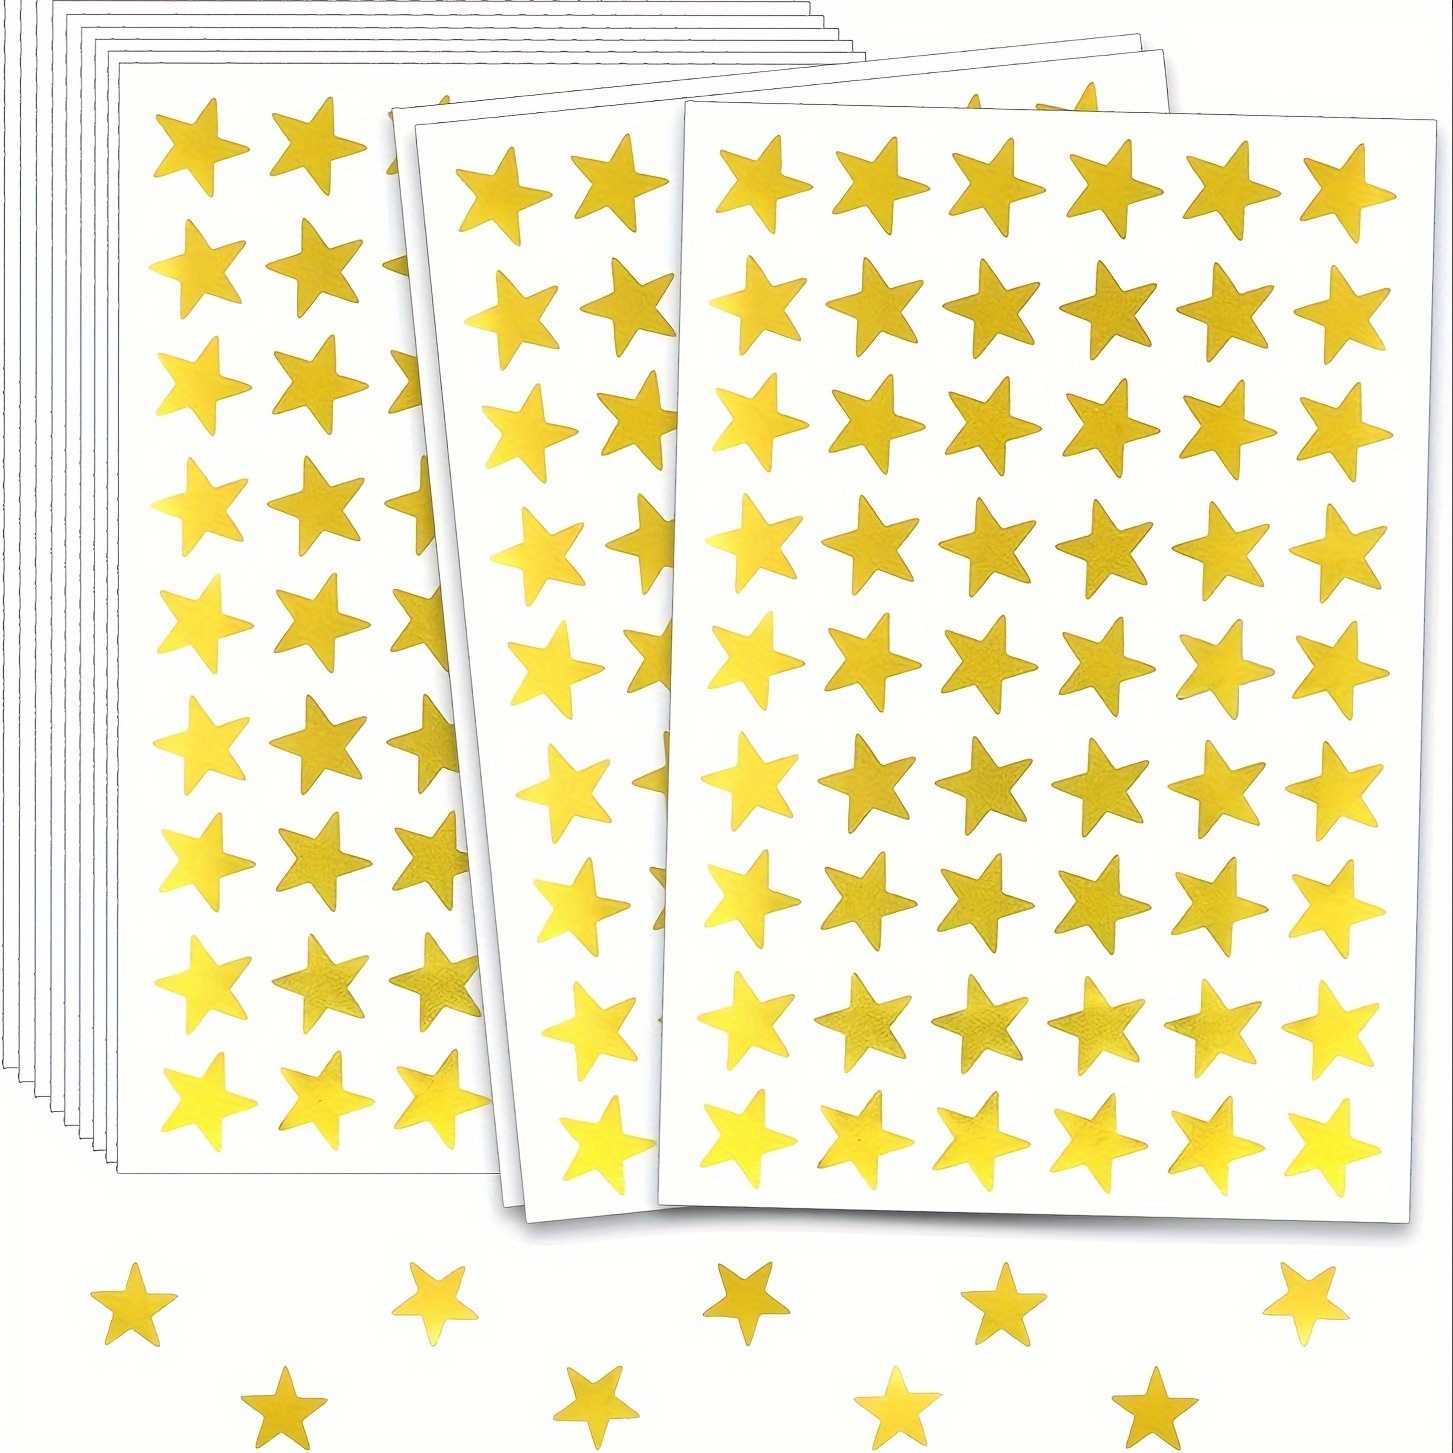 1500pcs Star Sticker, Self-Adhesive Holographic Small Star Sticker for  Crafts Laser Five-Pointed Mini Foil Star Sticker for Kids Reward at School